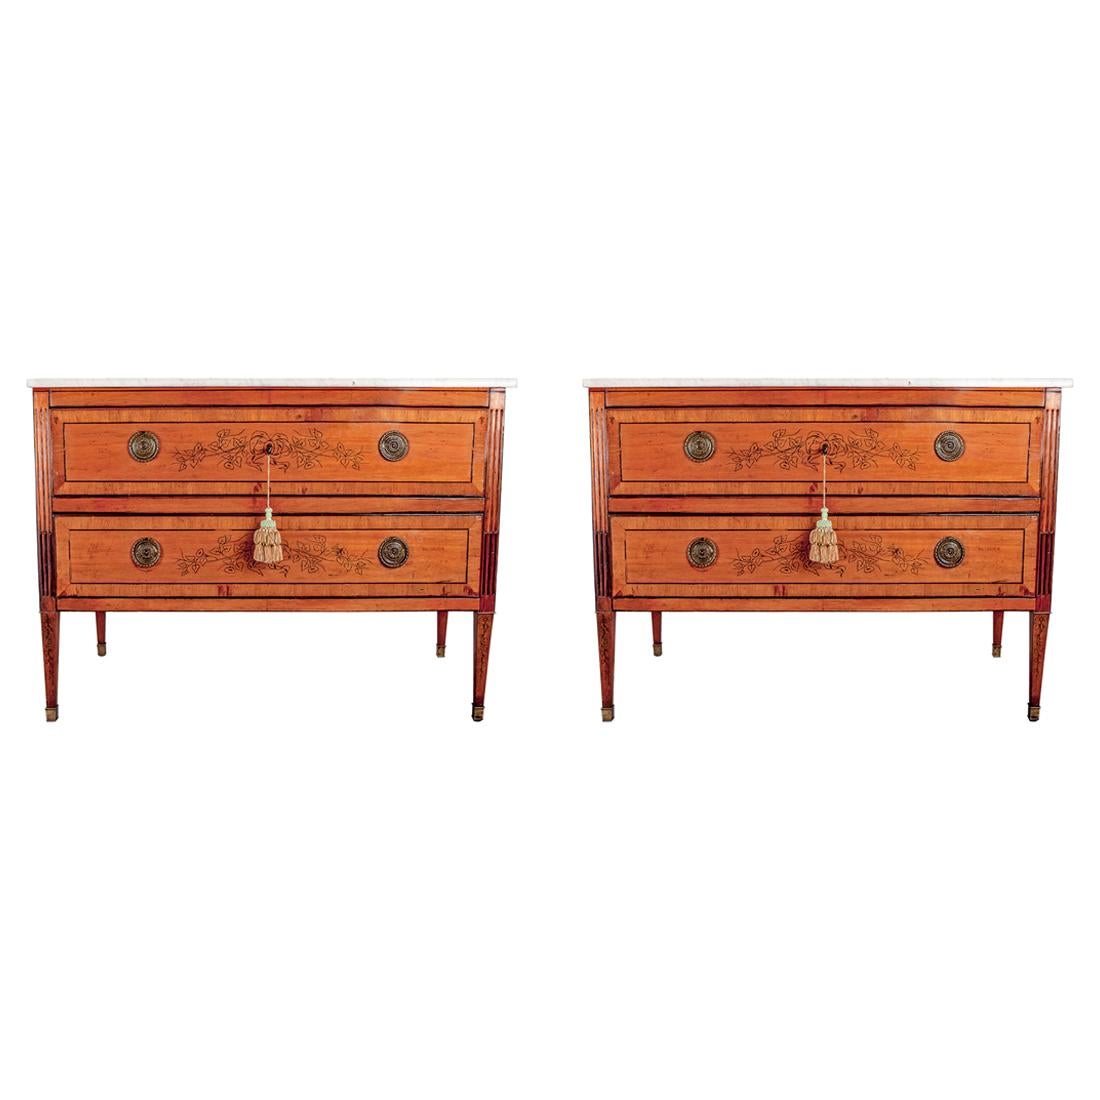 Pair of 18th Century Continental European Commodes